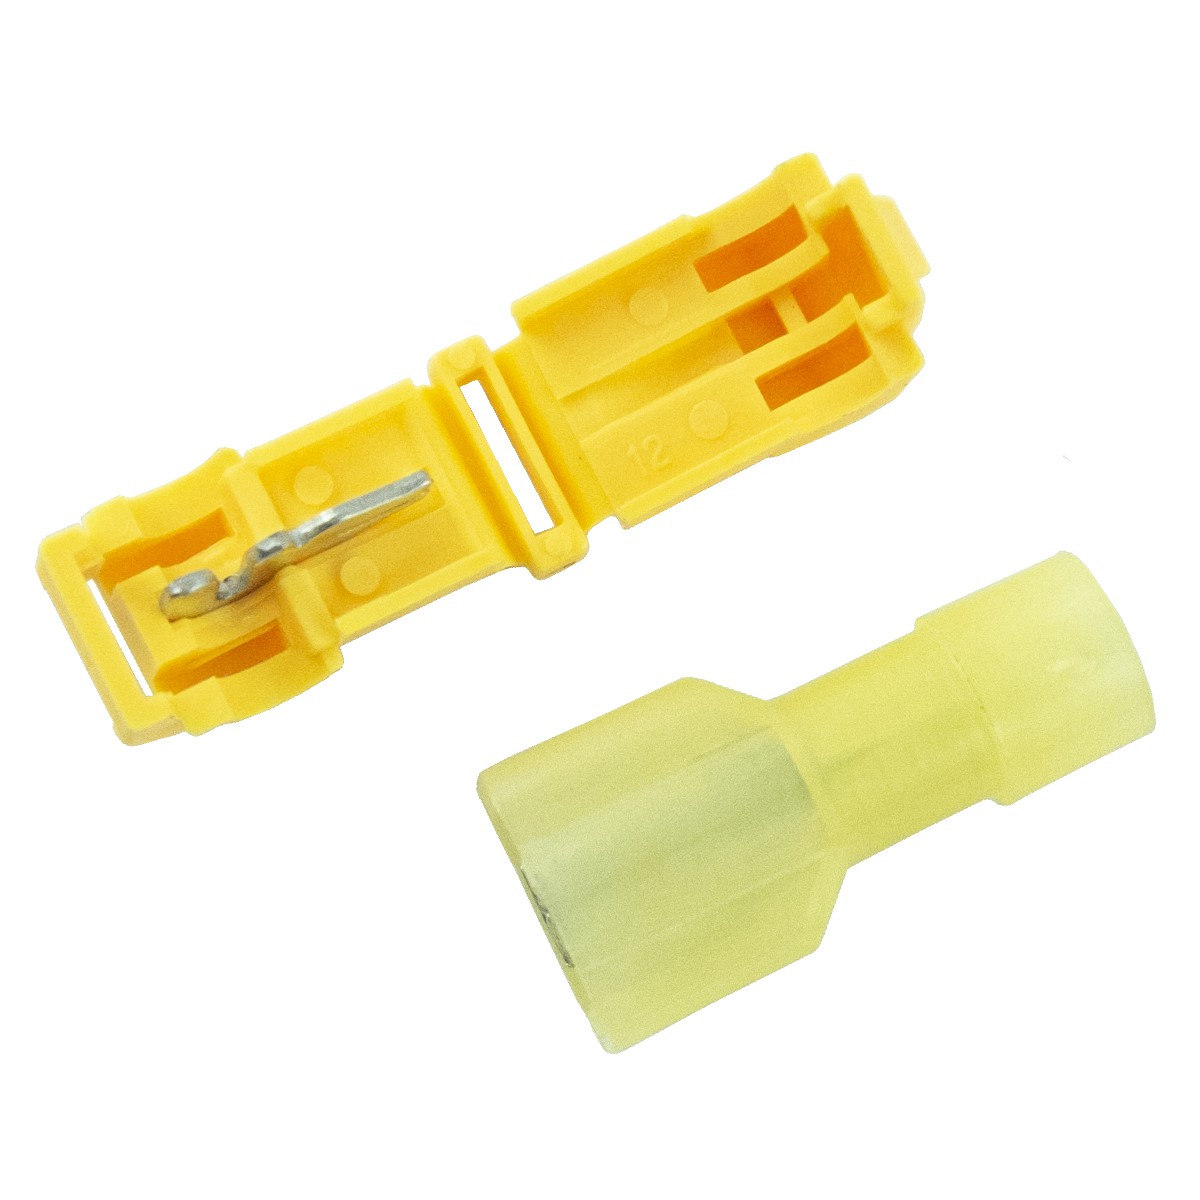 Cable connector 3 pcs + connector for the signal cable